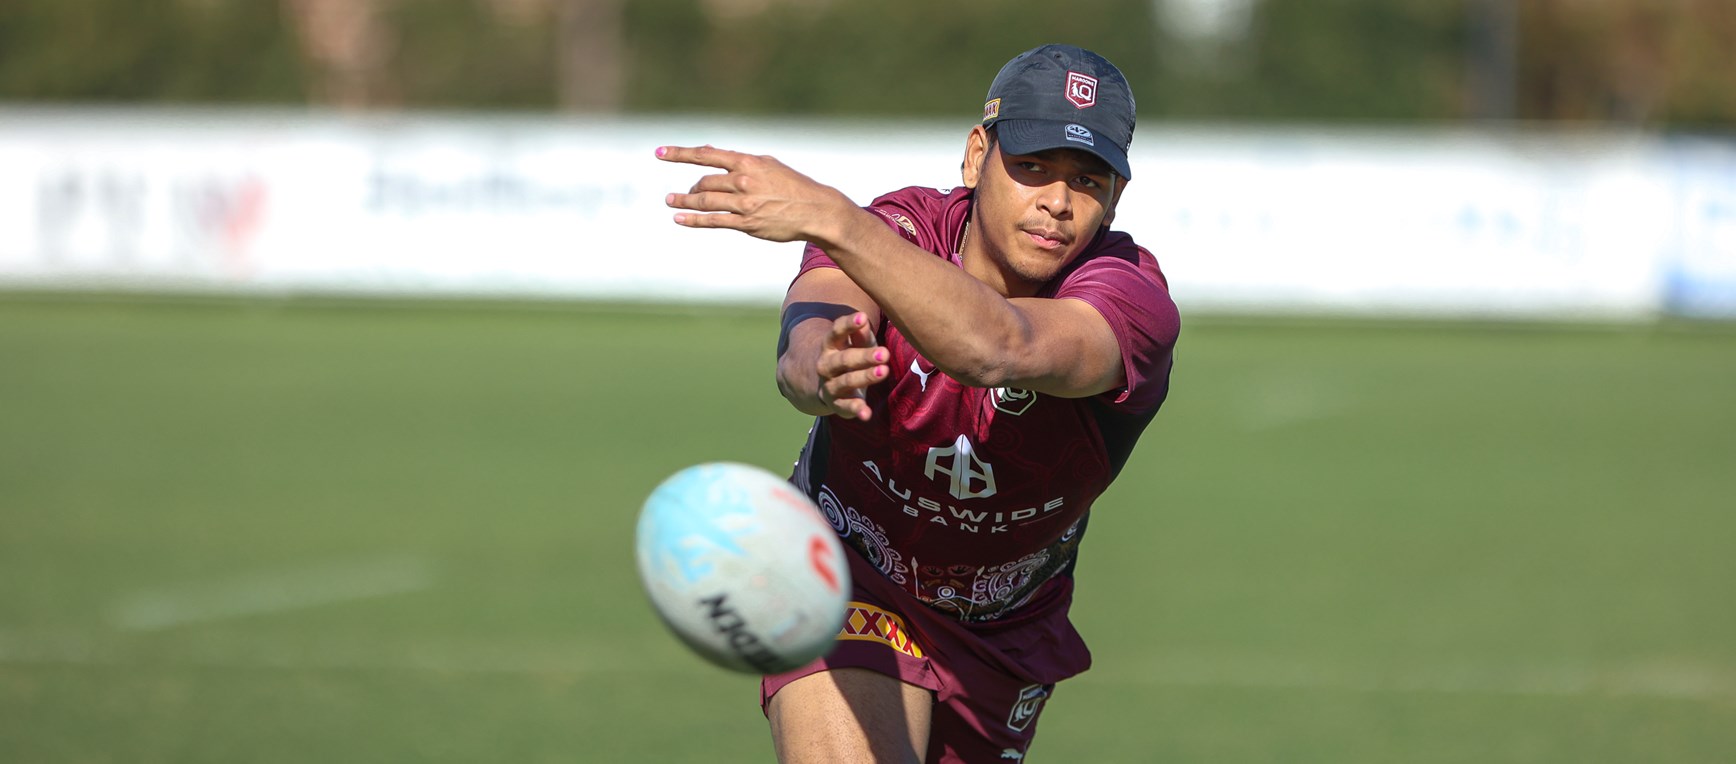 In pictures: Preparation continues for Maroons in Perth